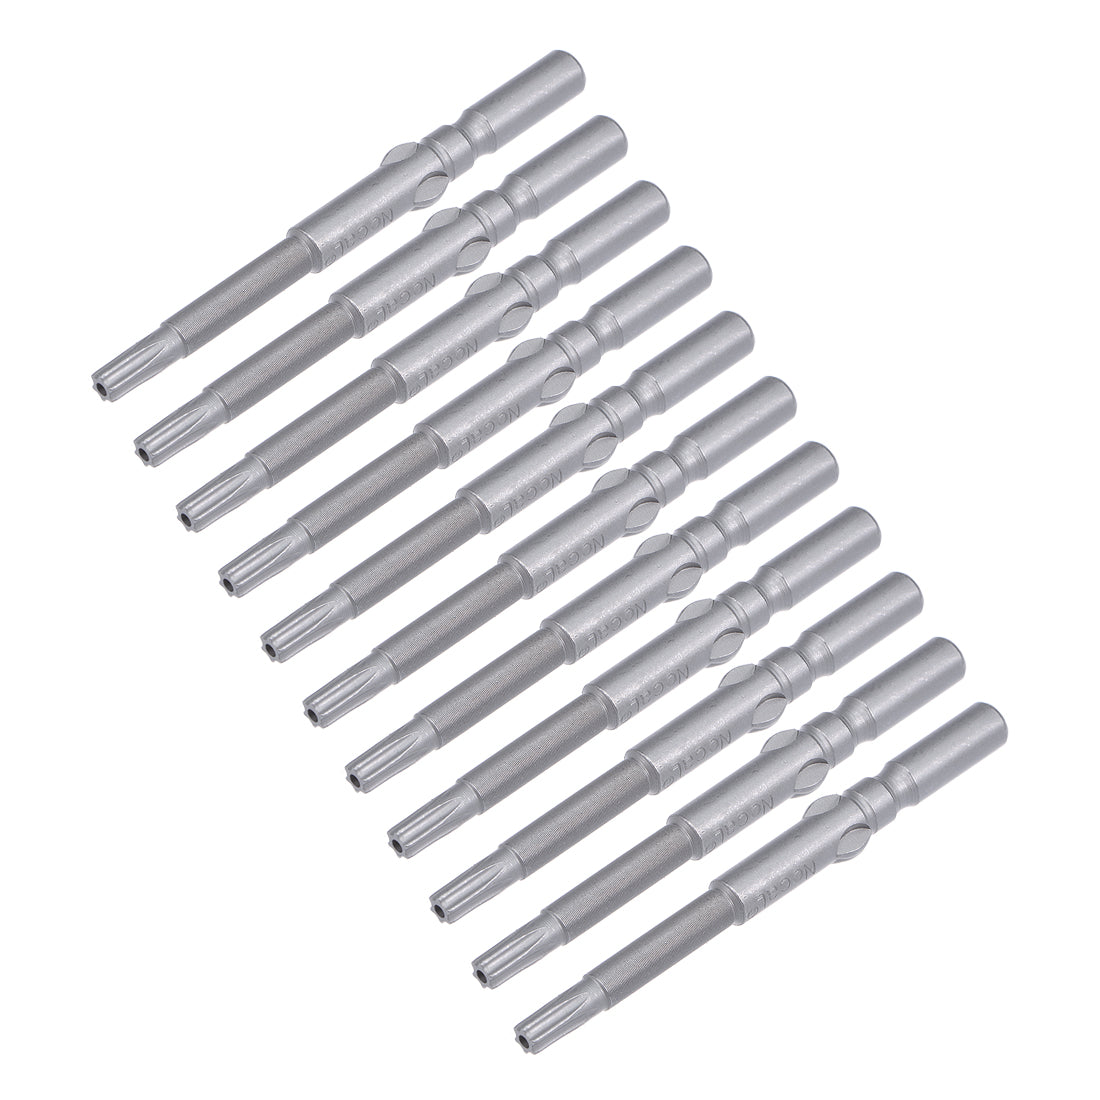 uxcell Uxcell 10Pcs 60mm Long 5mm Dia Round Shank Magnetic Torx Security Screwdriver Bits S2 High Alloy Steel